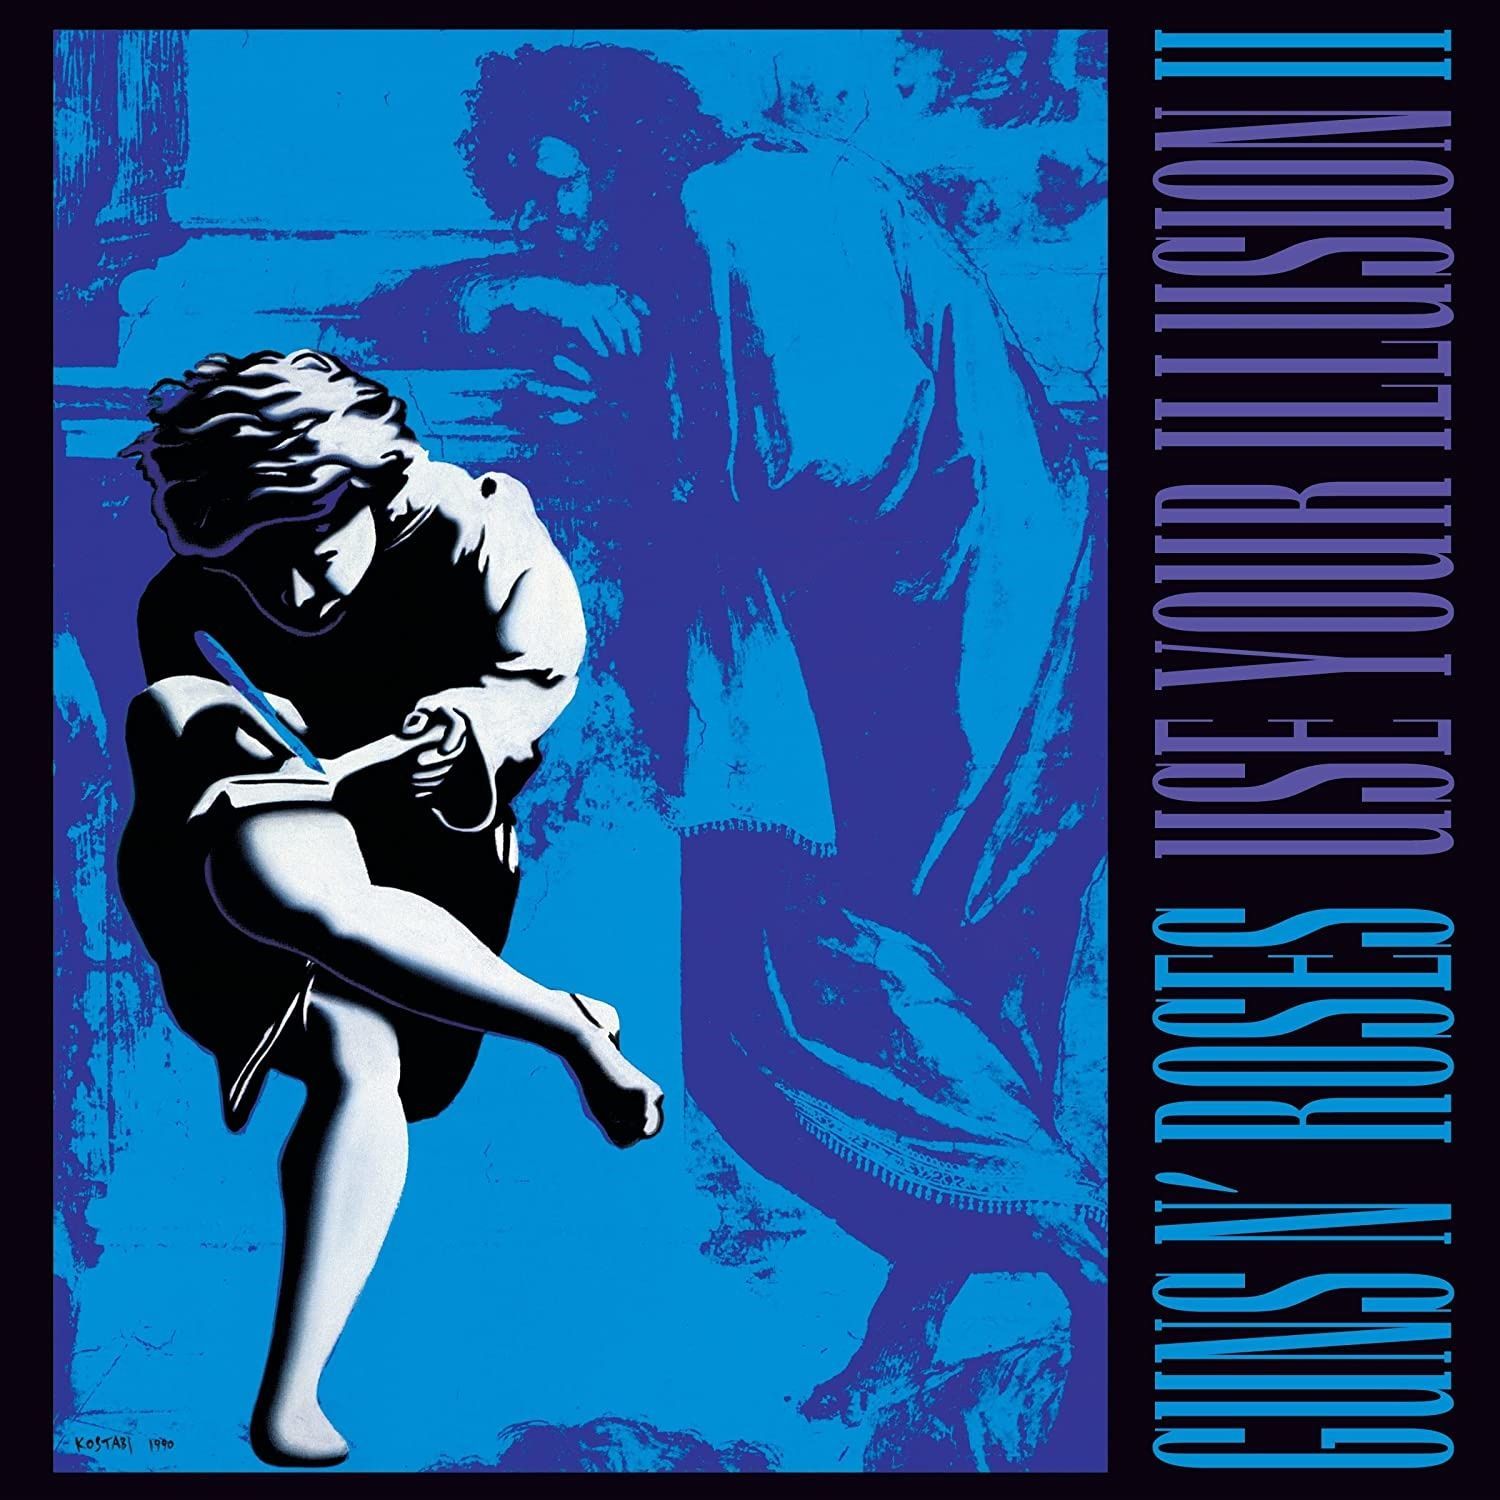 GUNS N' ROSES	USE YOUR ILLUSION II (DELUXE) (2 CD)